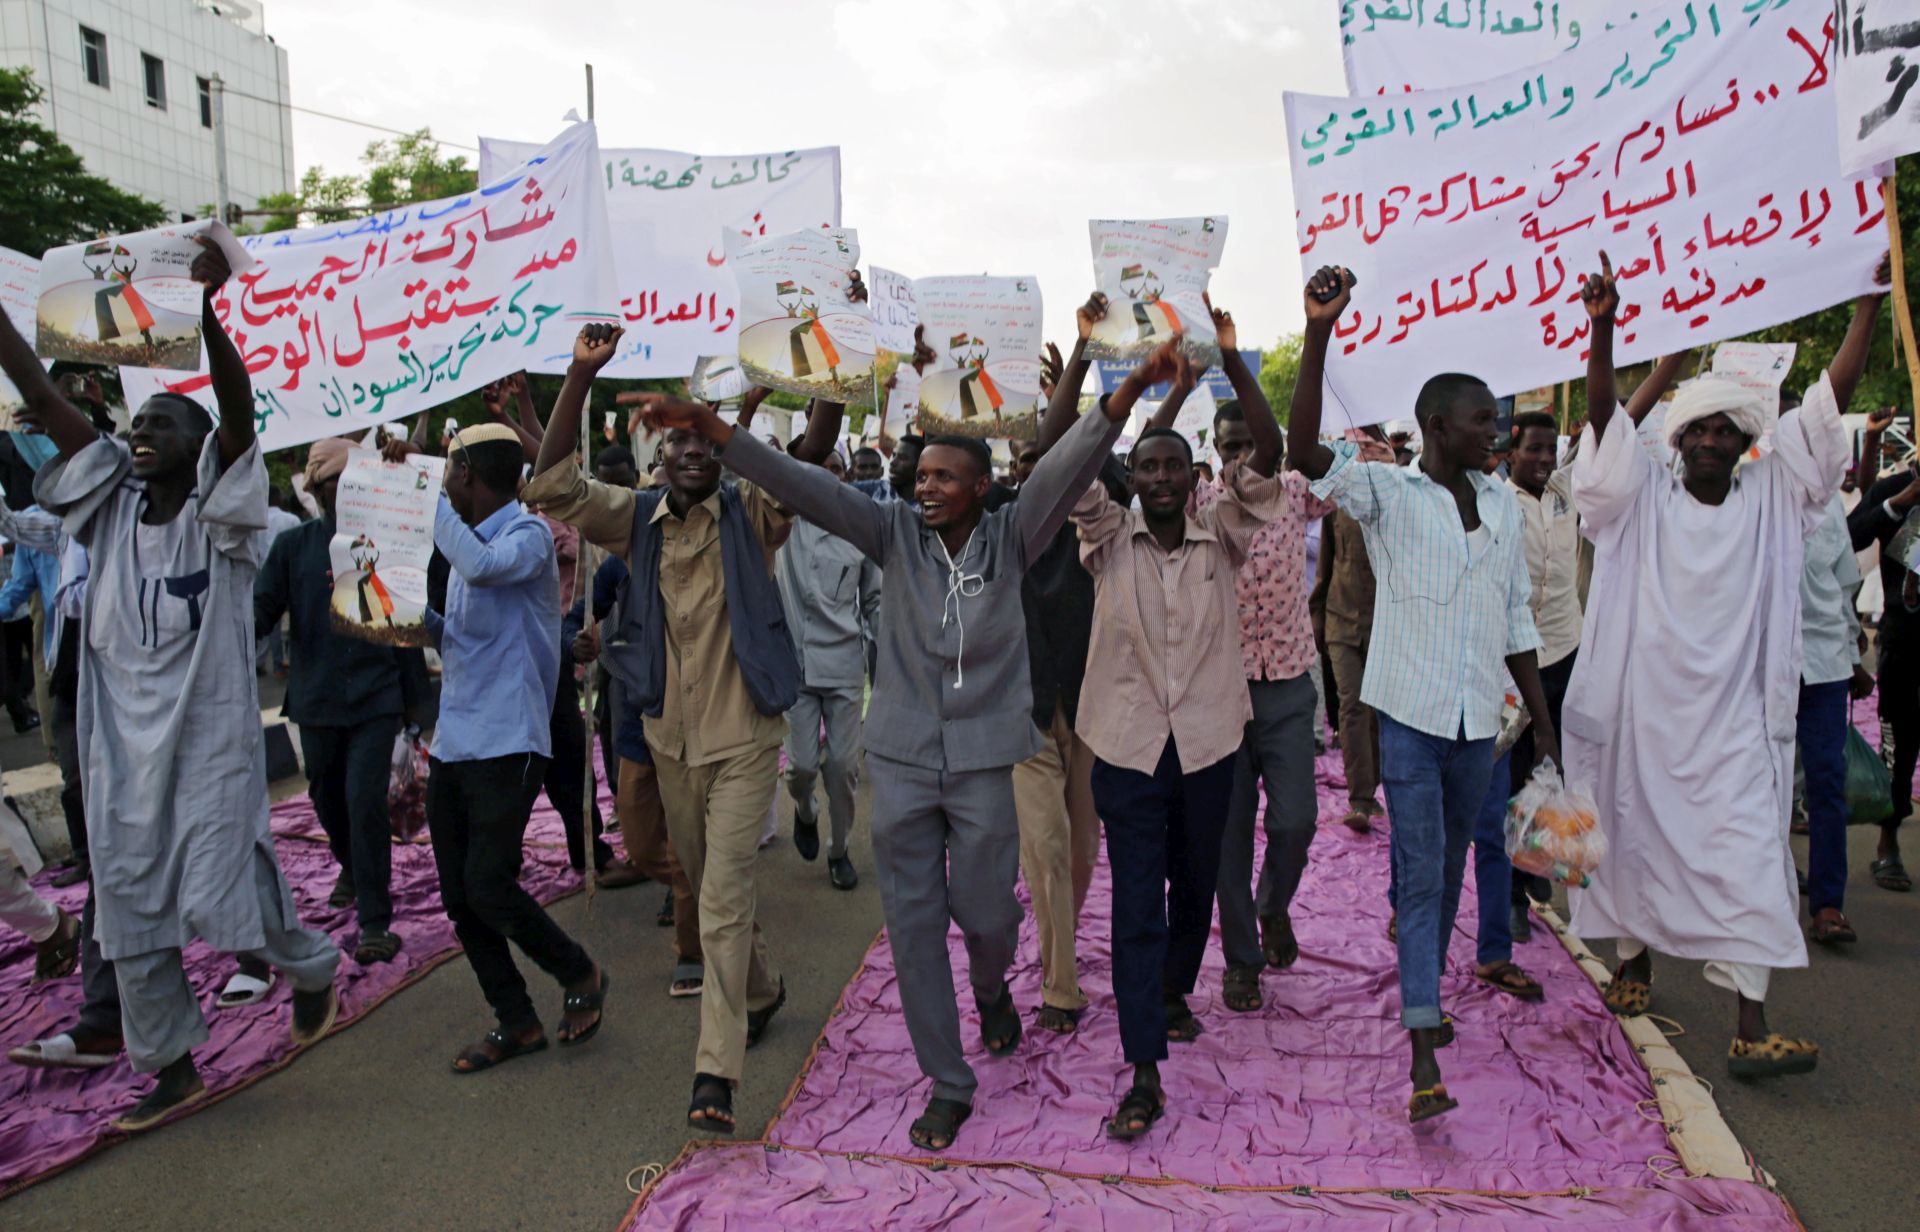 epa07616233 Supporters of the Transitional Military Council (TMC) rally in front of the Presidential Palace in Khartoum, Sudan, 31 May 2019. The pro-military protest in support of the TMC comes a day after a young man was killed and several others wounded by alleged shots from government forces near the sit-in, and the TMC told broadcaster AlJazeera it was shutting down its office and withdrawing staff members' work permits.  EPA/MARWAN ALI